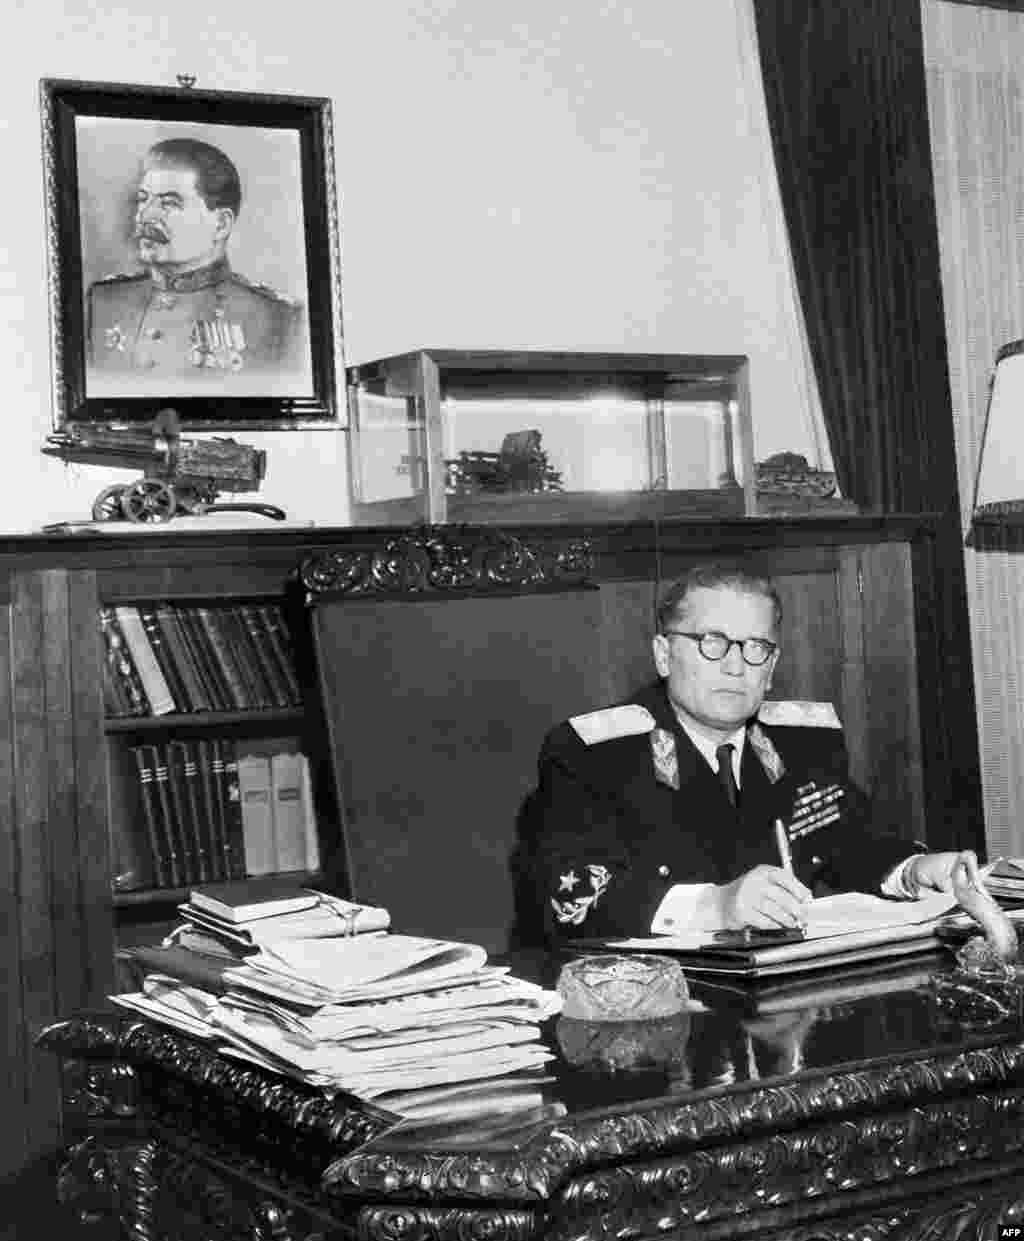 Yugoslavia&rsquo;s new leader, Josip Broz Tito, at his desk in 1947. The authoritarian ruler initially followed the political lead of Josef Stalin&rsquo;s U.S.S.R., but the two communists soon became bitter enemies. After Stalin sent assassins to Yugoslavia, Tito wrote in a letter: &ldquo;Stop sending people to kill me. We&#39;ve already captured five of them, one of them with a bomb and another with a rifle.&hellip; If you don&#39;t stop sending killers, I&#39;ll send one to Moscow, and I won&#39;t have to send a second.&rdquo; &nbsp; &nbsp;